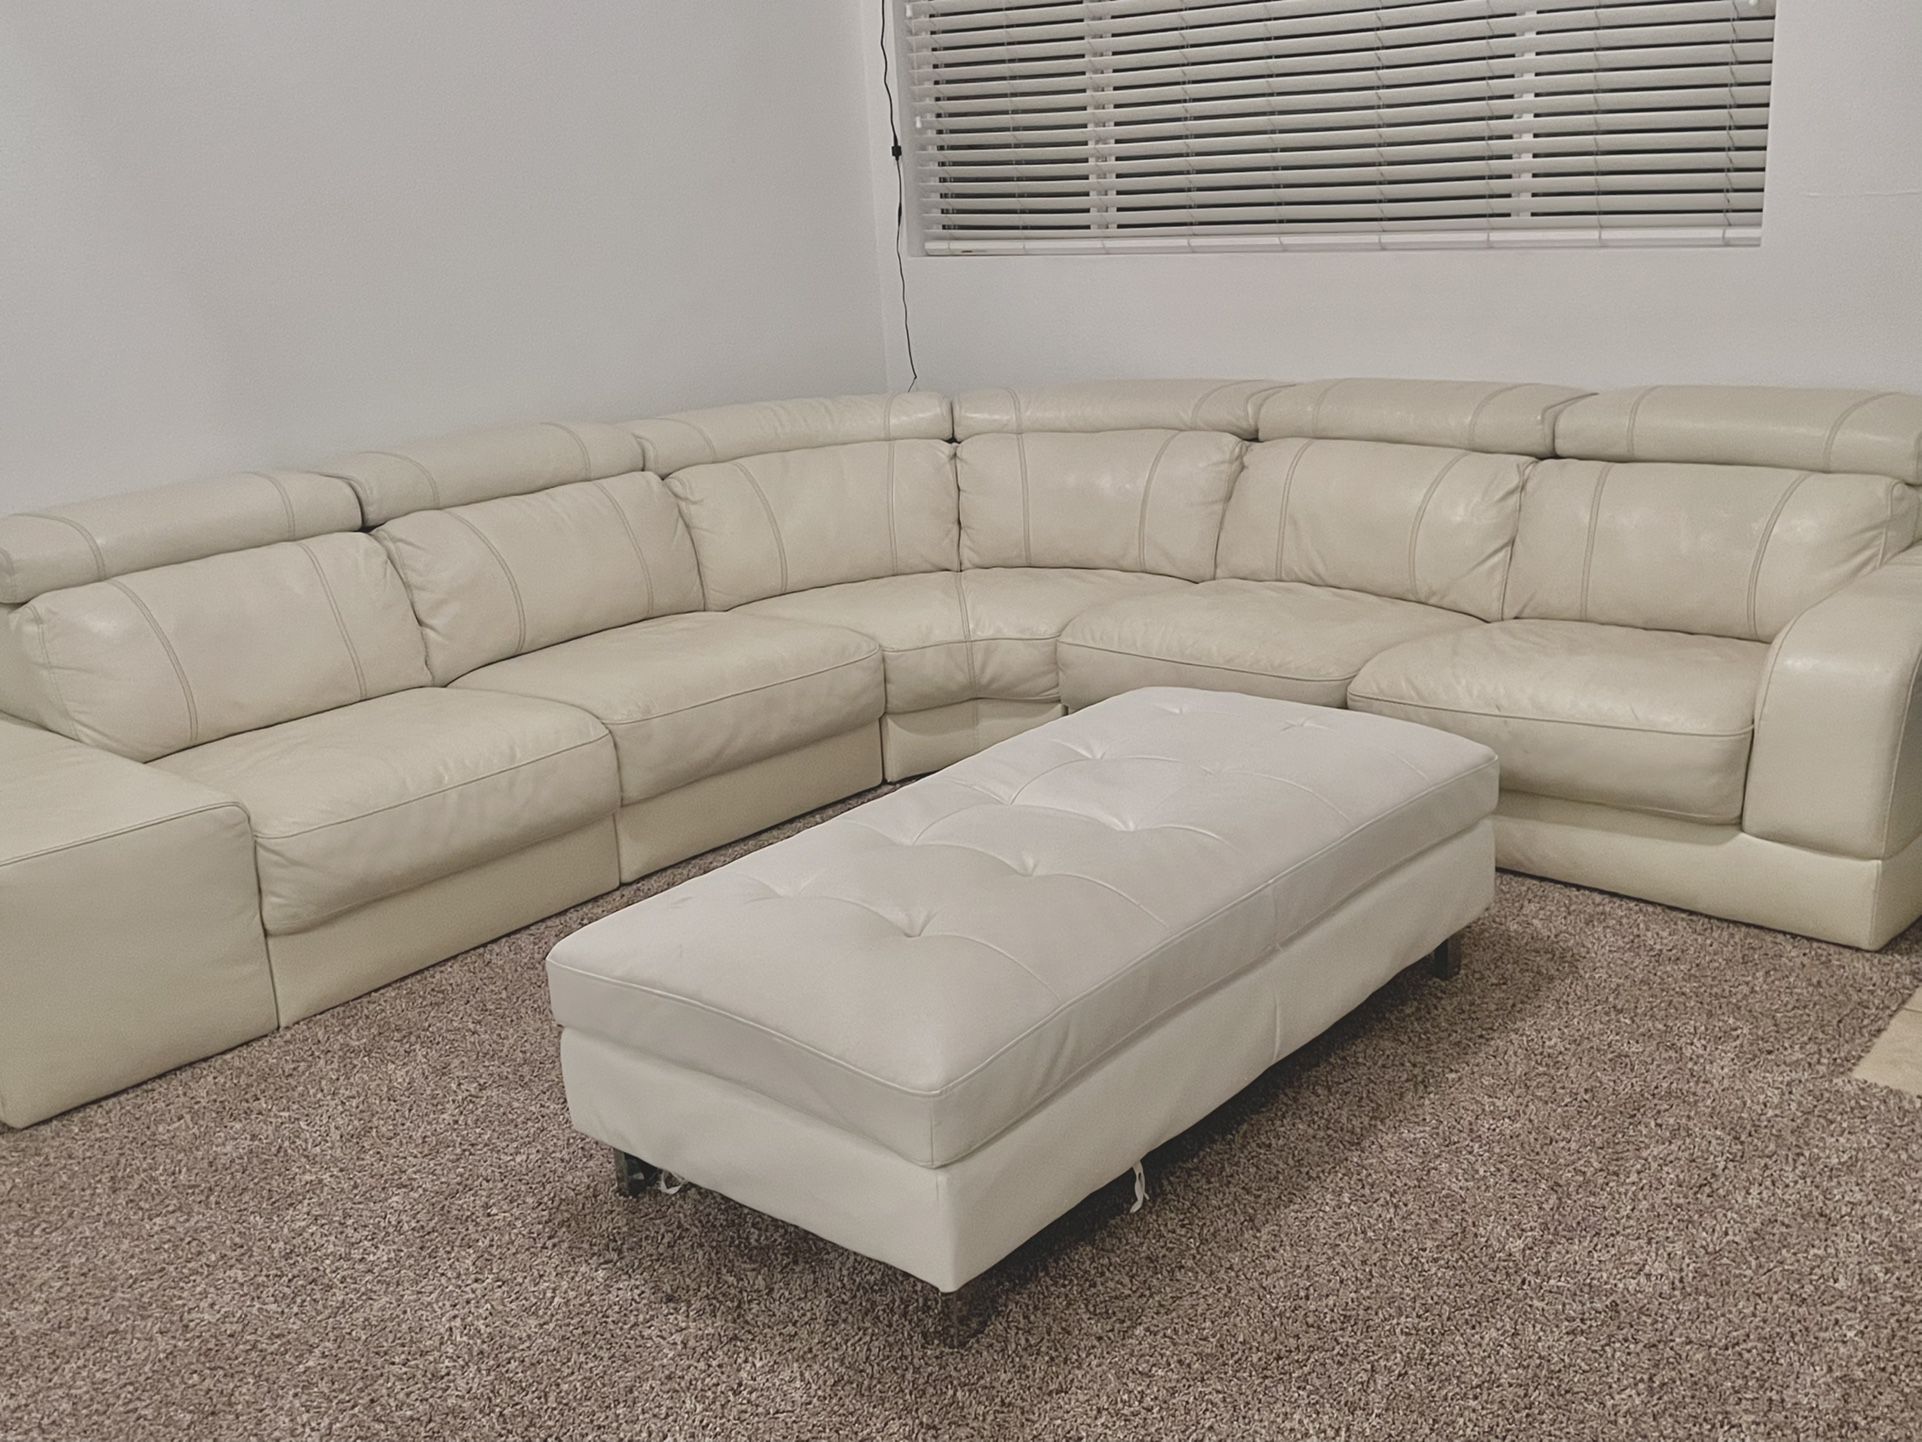 WHITE LEATHER COUCH 